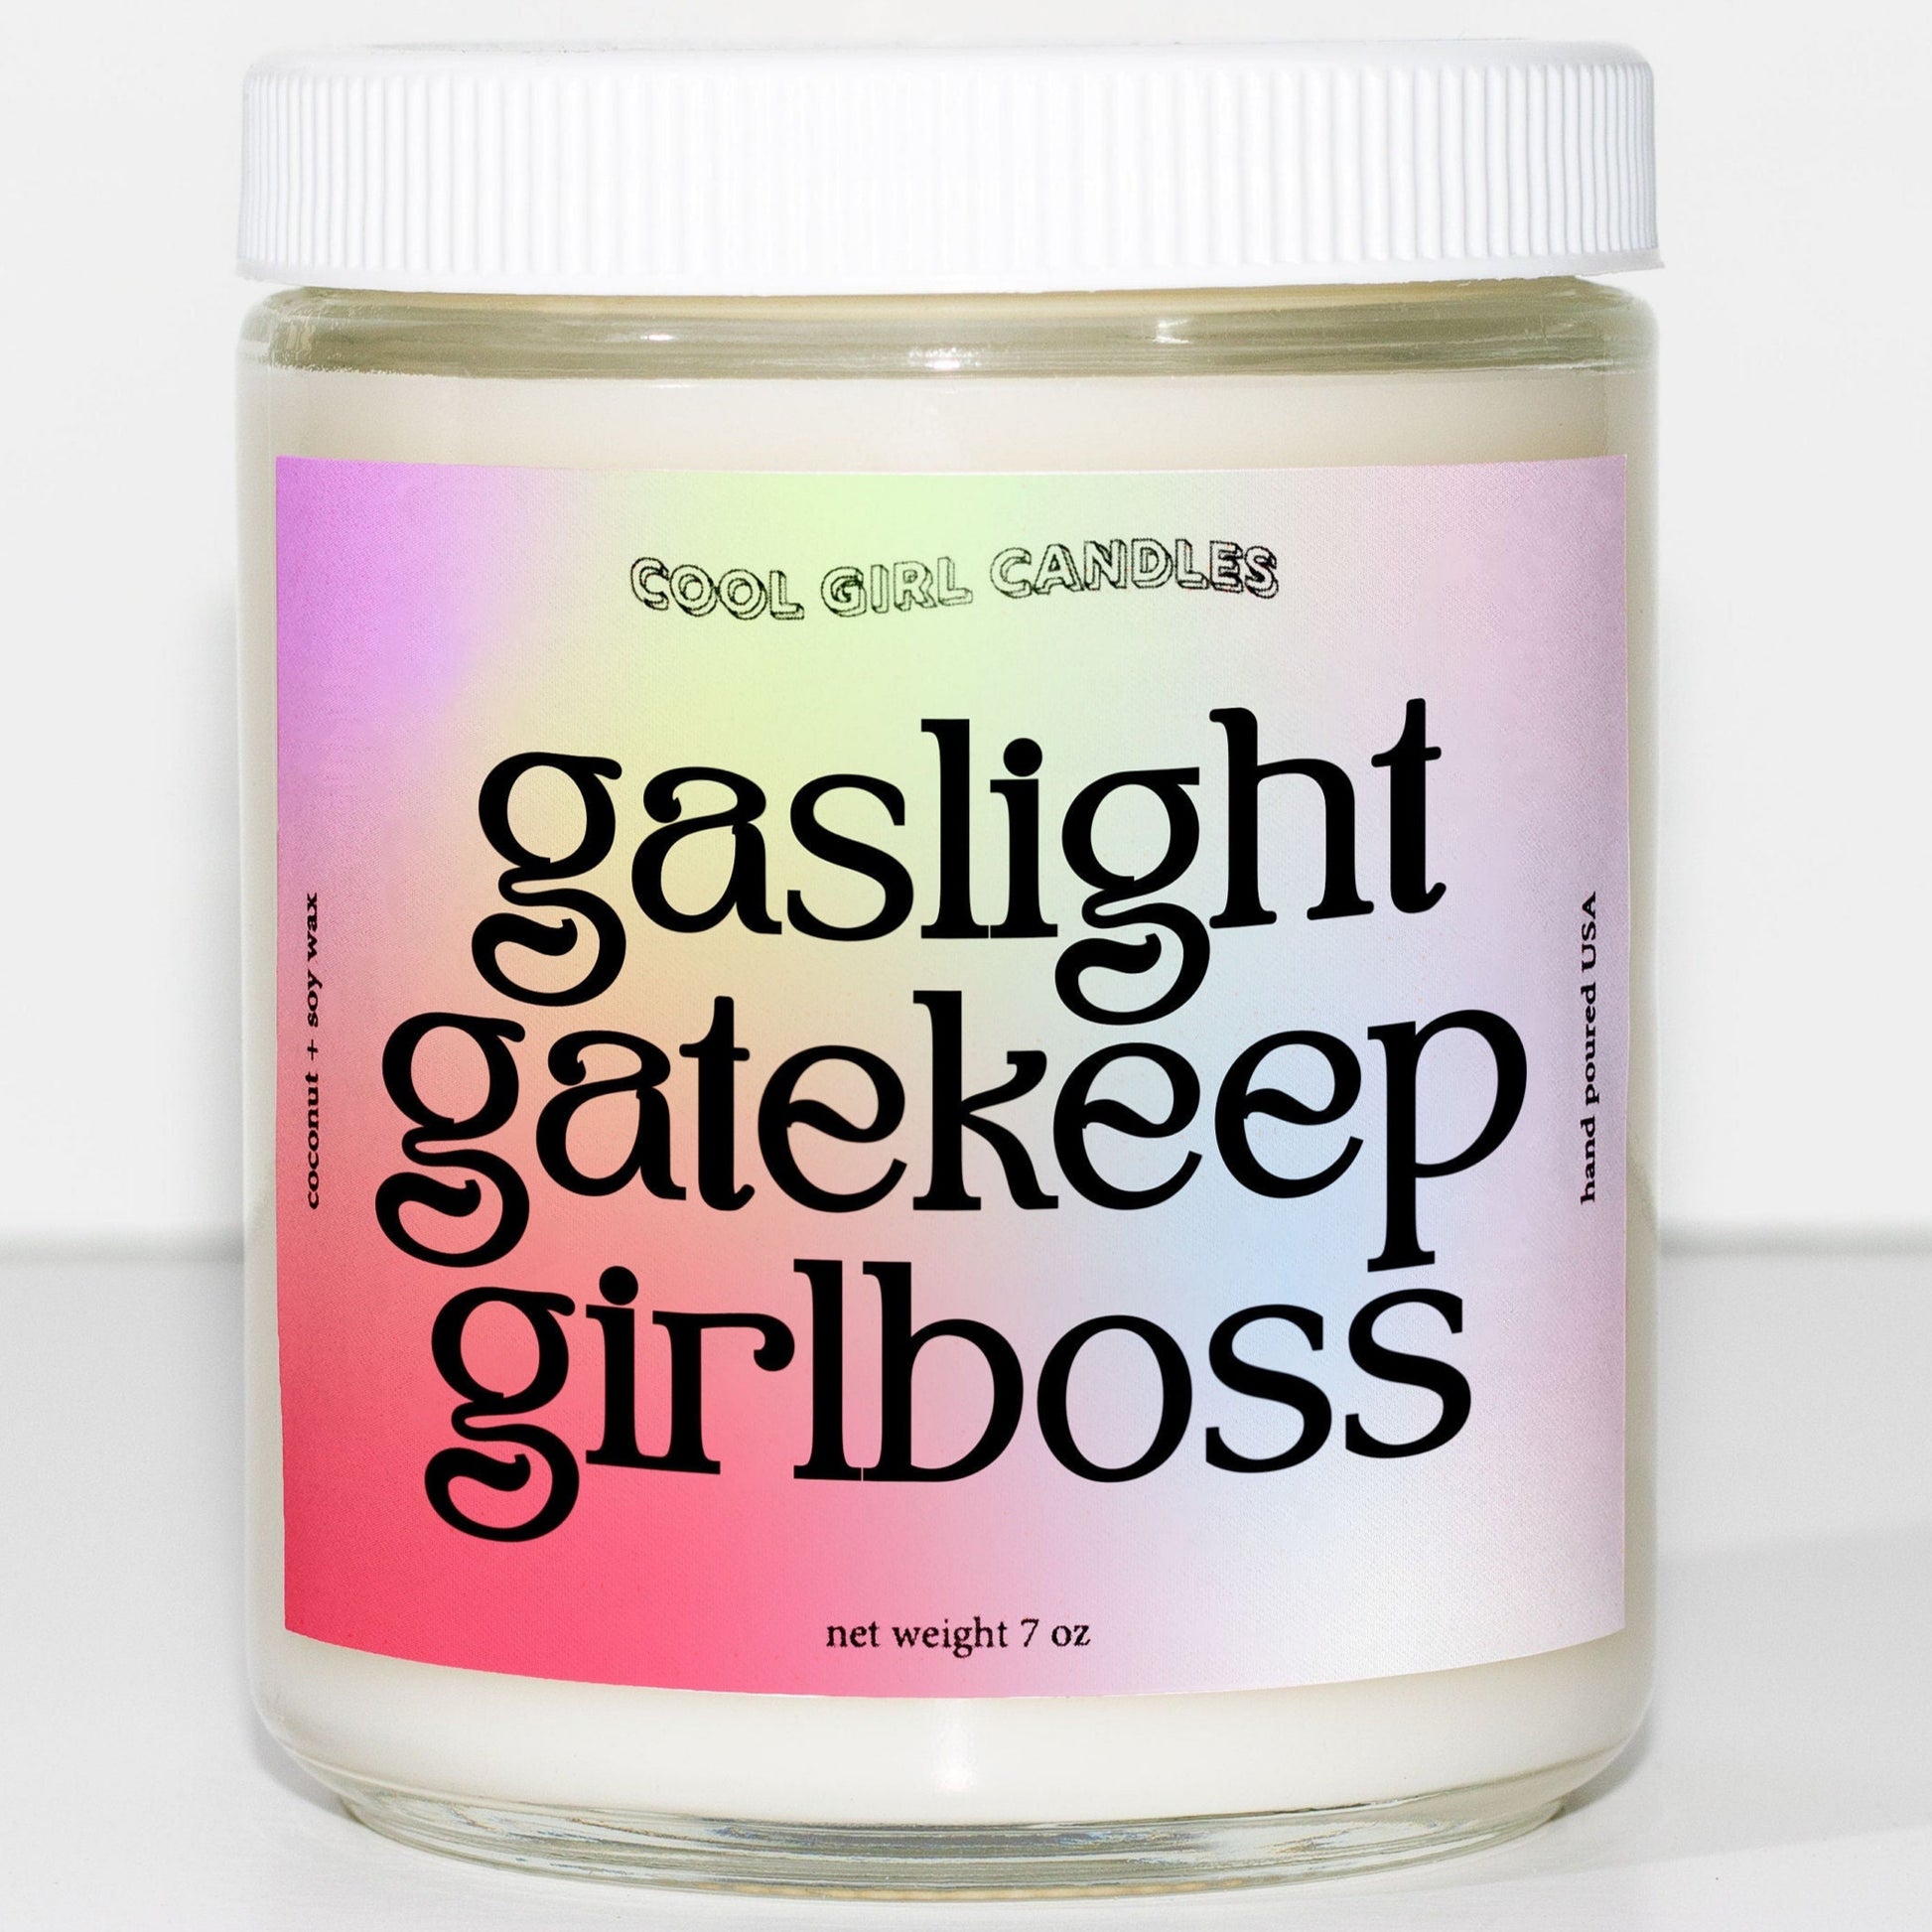 cool girl candles gaslight gatekeep girlboss scented candle cute customizable scent candle for gen z gift entrepreneur gift funny tiktok candle